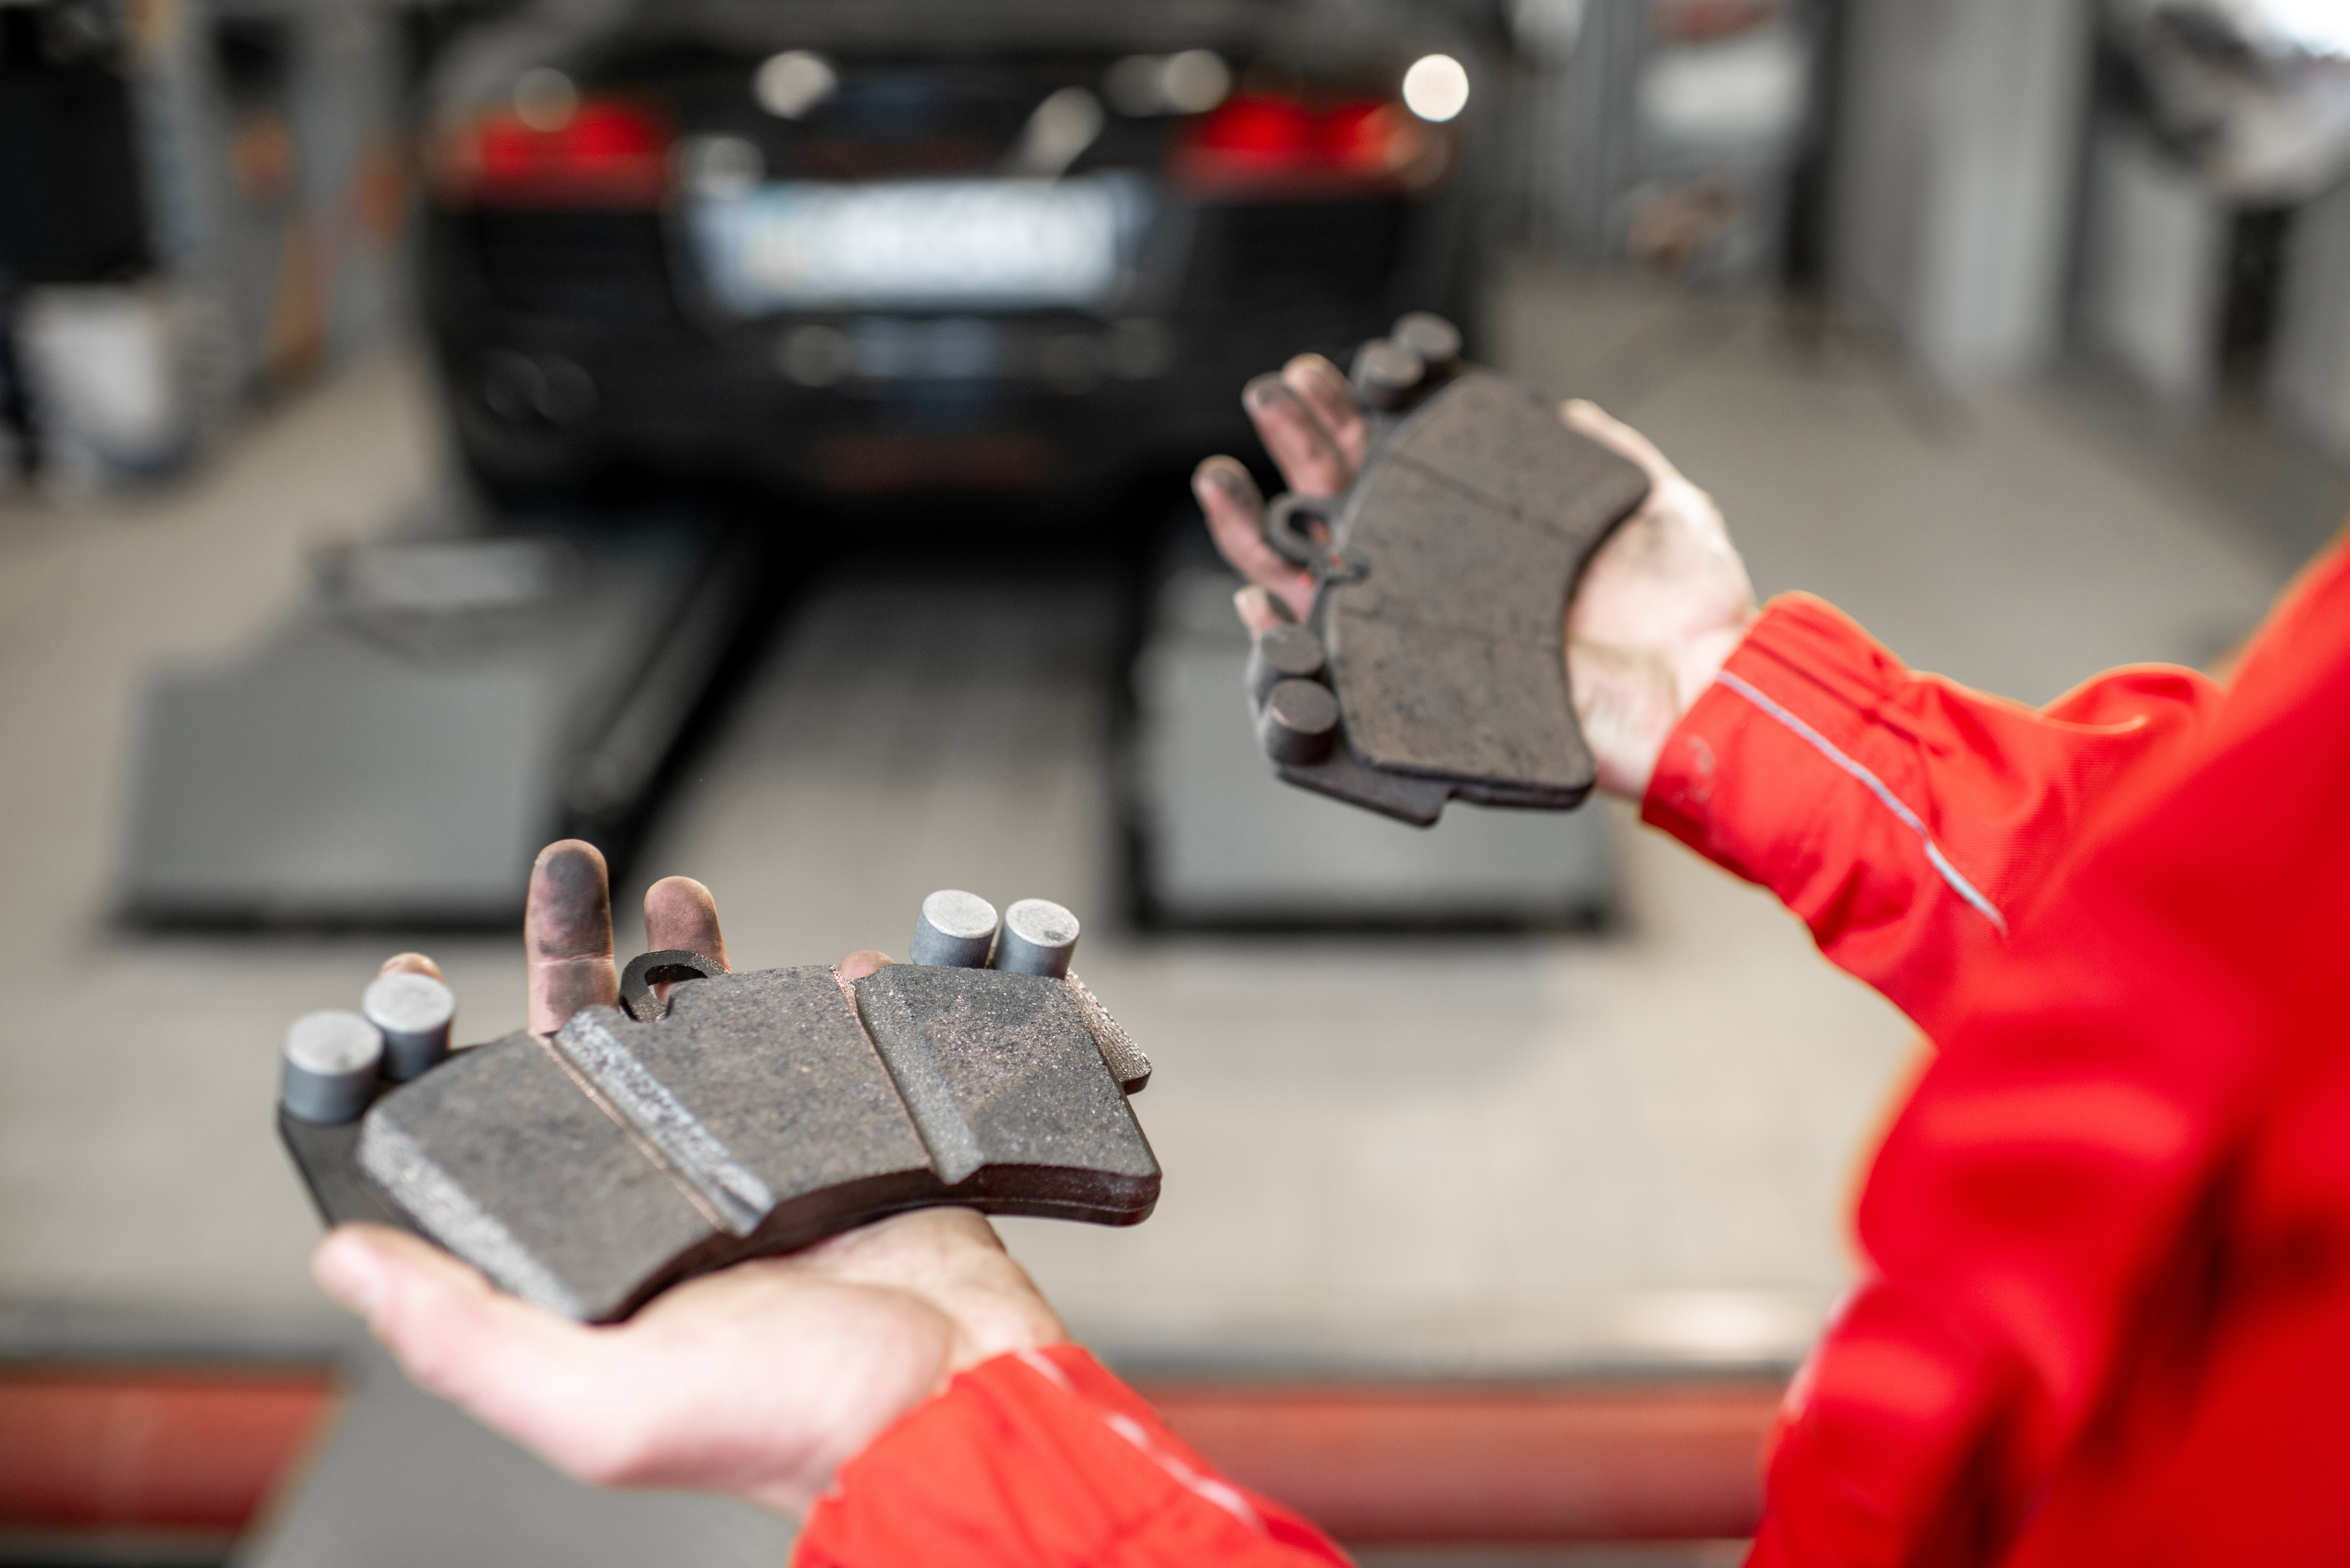 Brake Pads - Different Types, How They are Graded, and Which To Choose | Parker's Tire & Auto Service in Ocala, FL